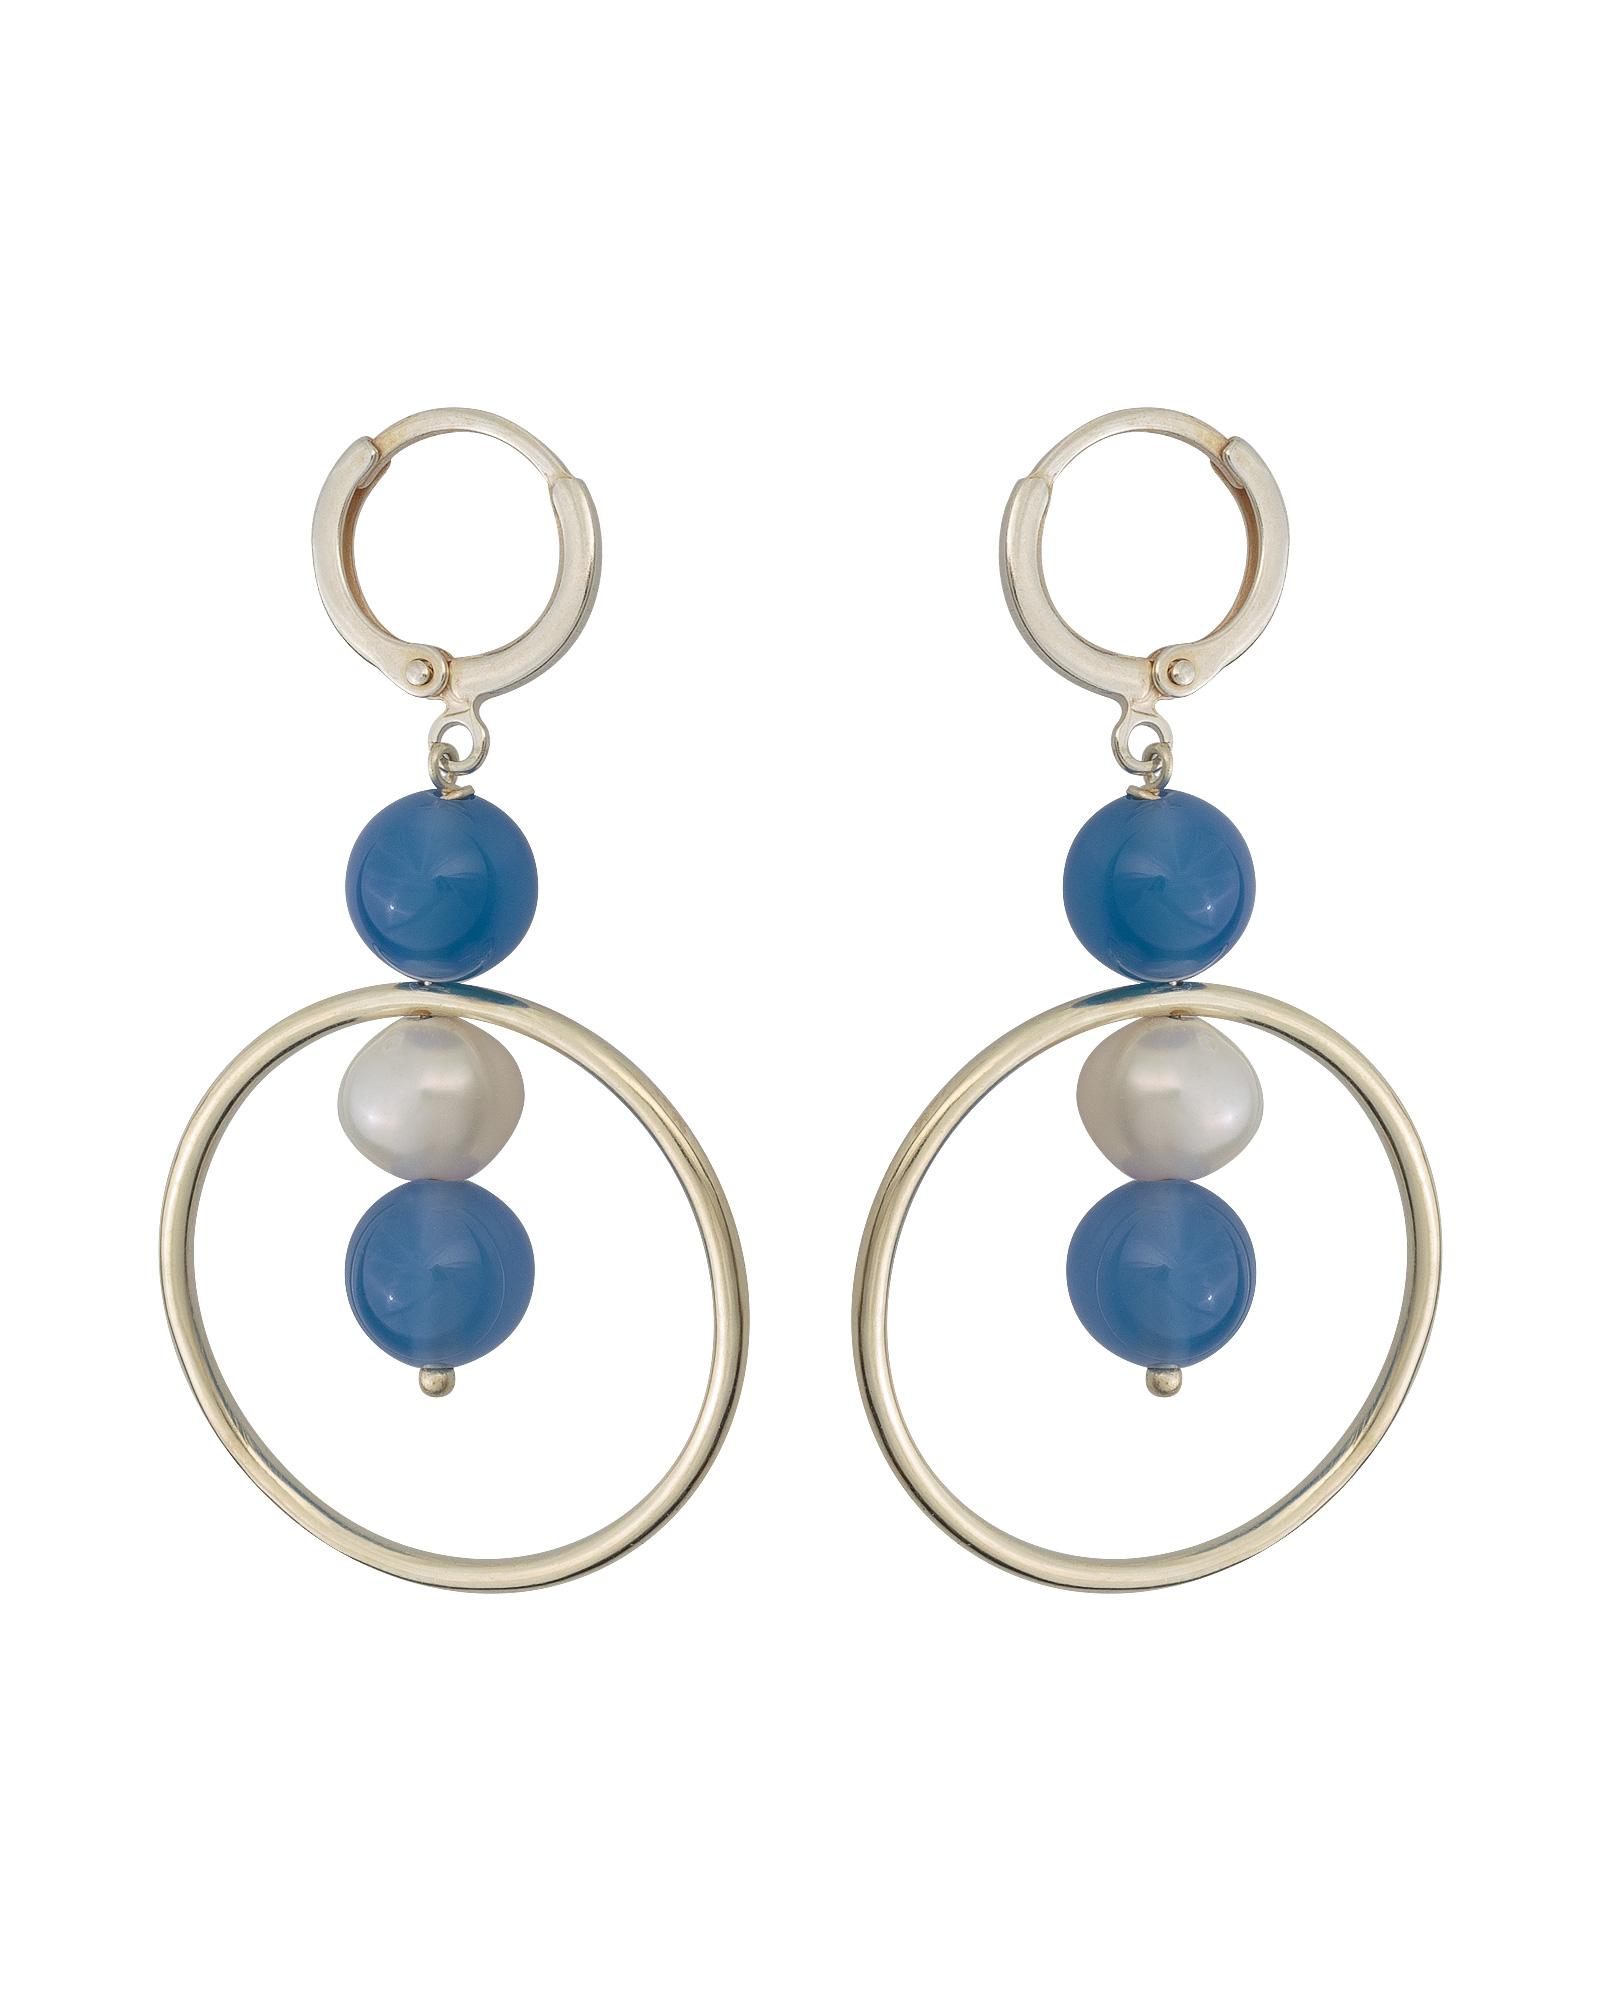 Oliver Bonas Mateo Blue Calci & Pearl Gold Plated Drop Earrings in Blue ...